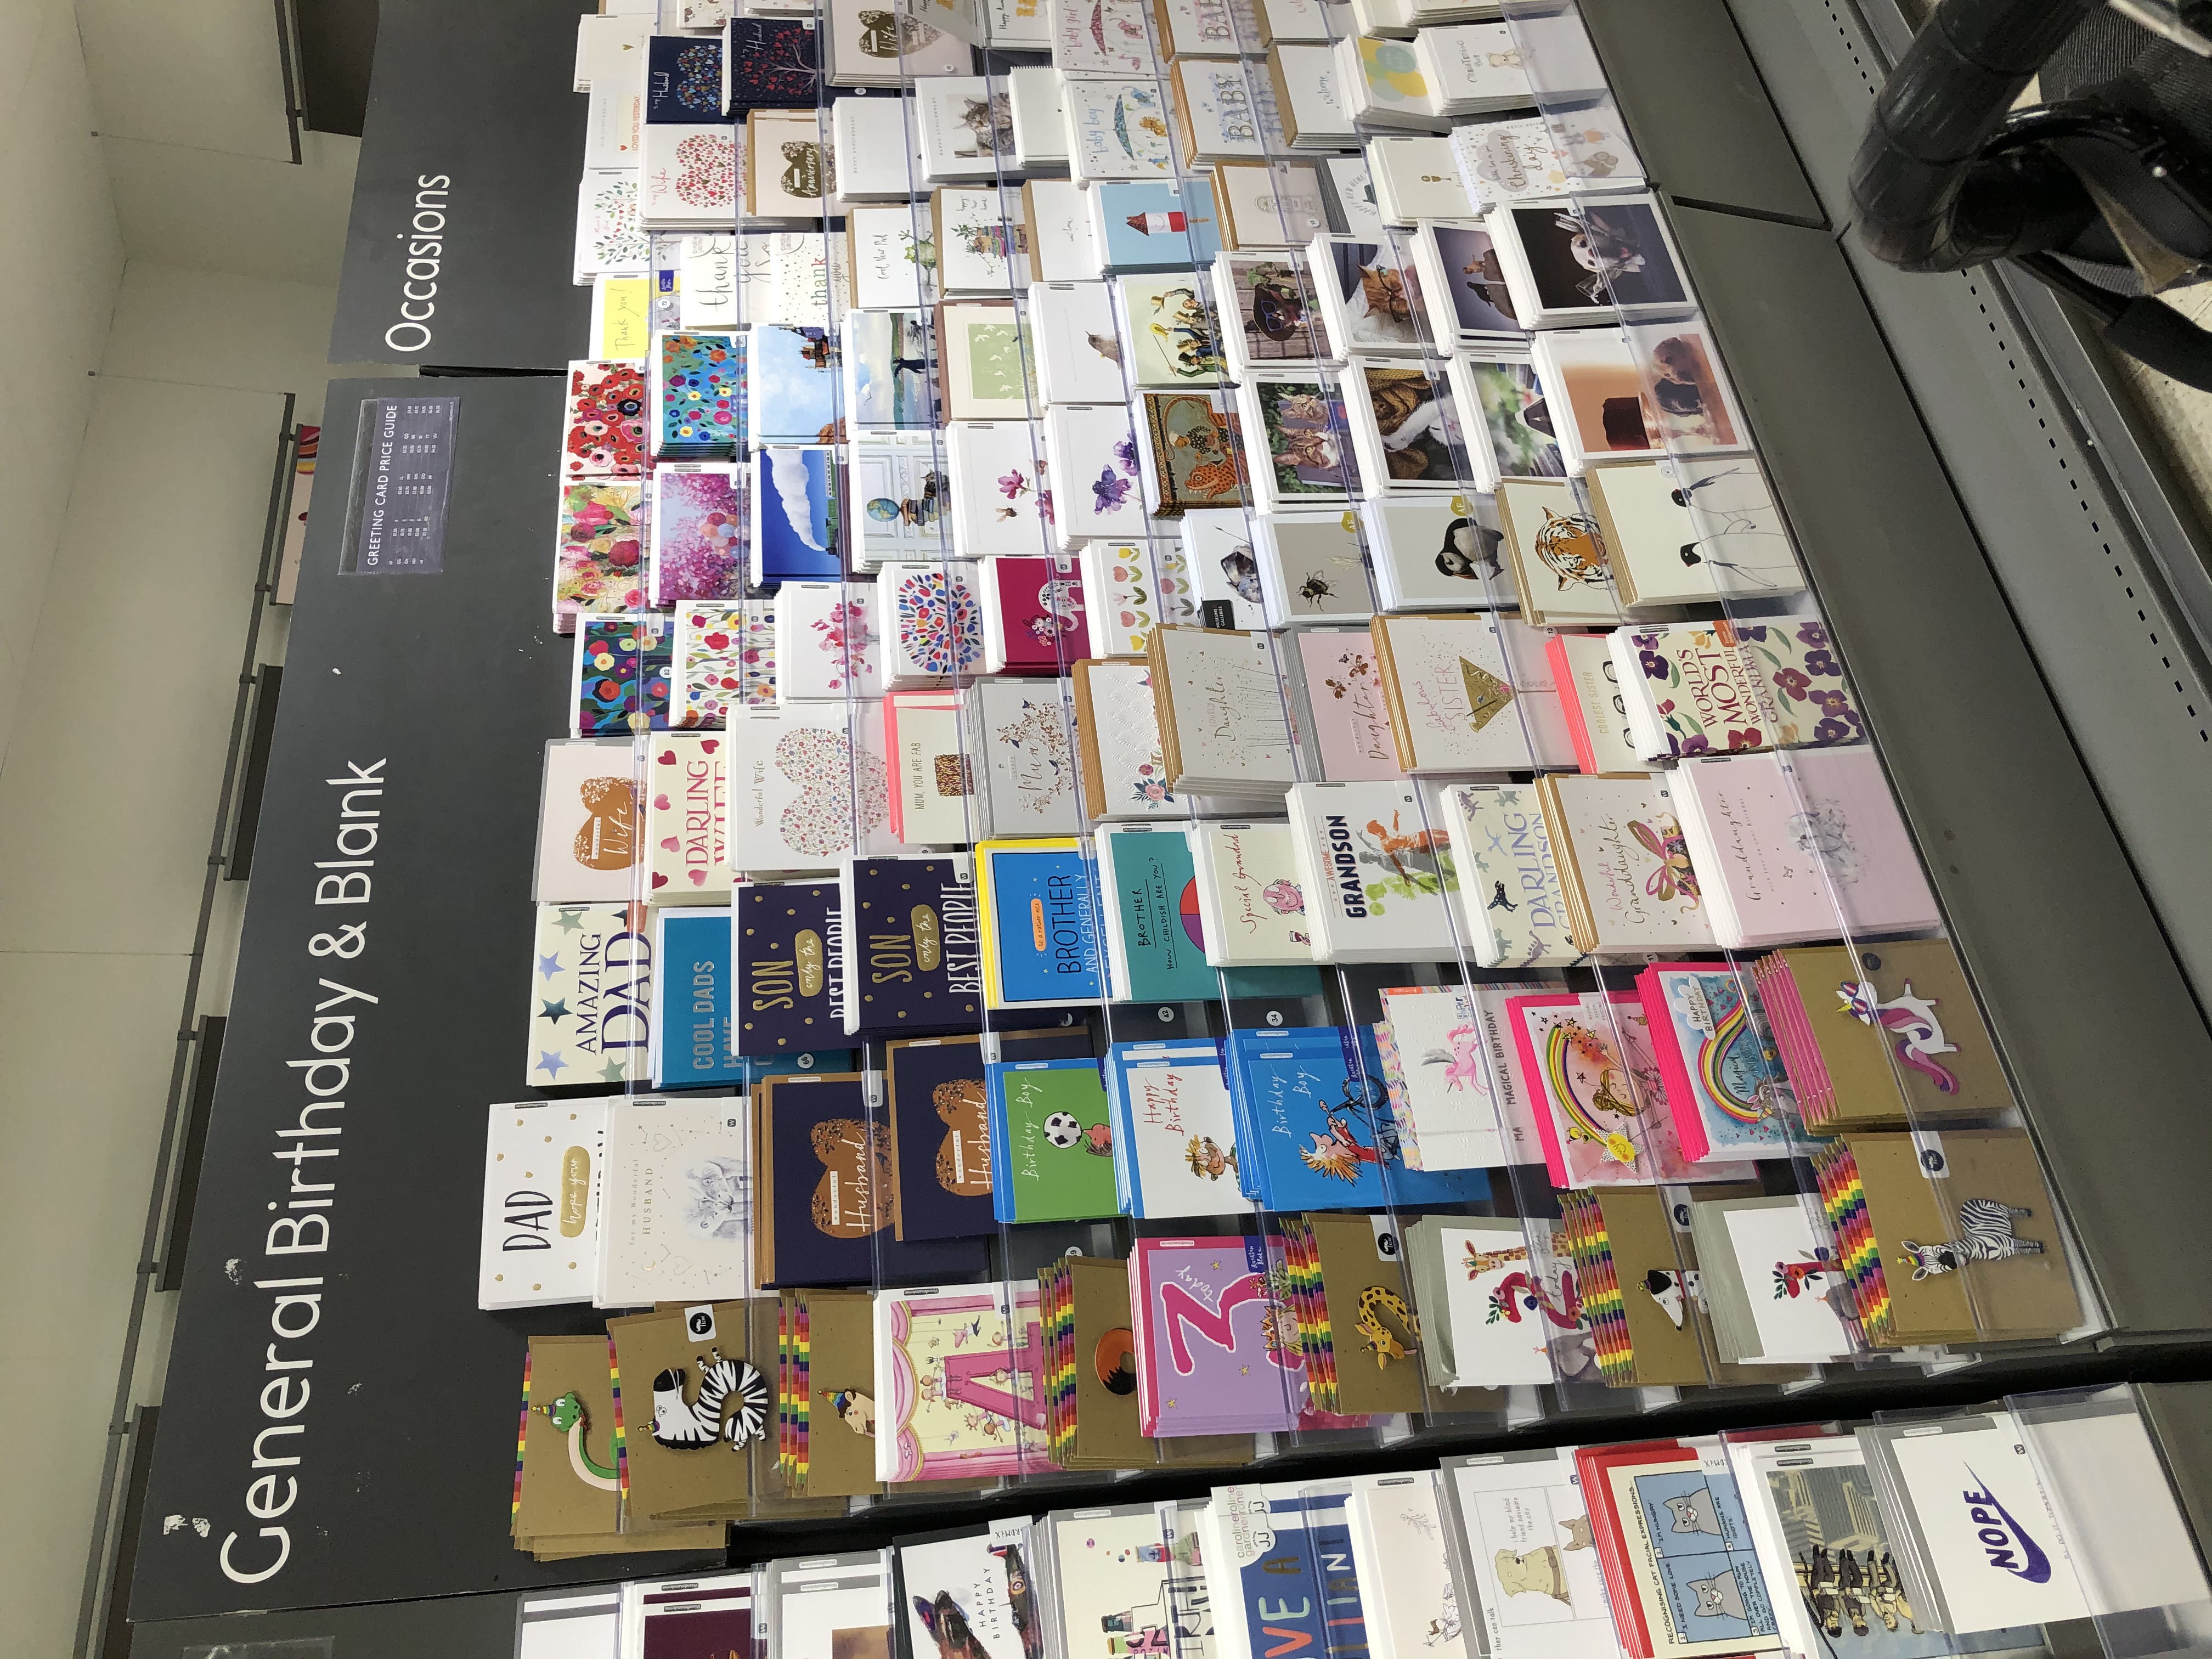 Above: The new card collection, brokered by Woodmansterne, includes designs from around 33 different publishers.